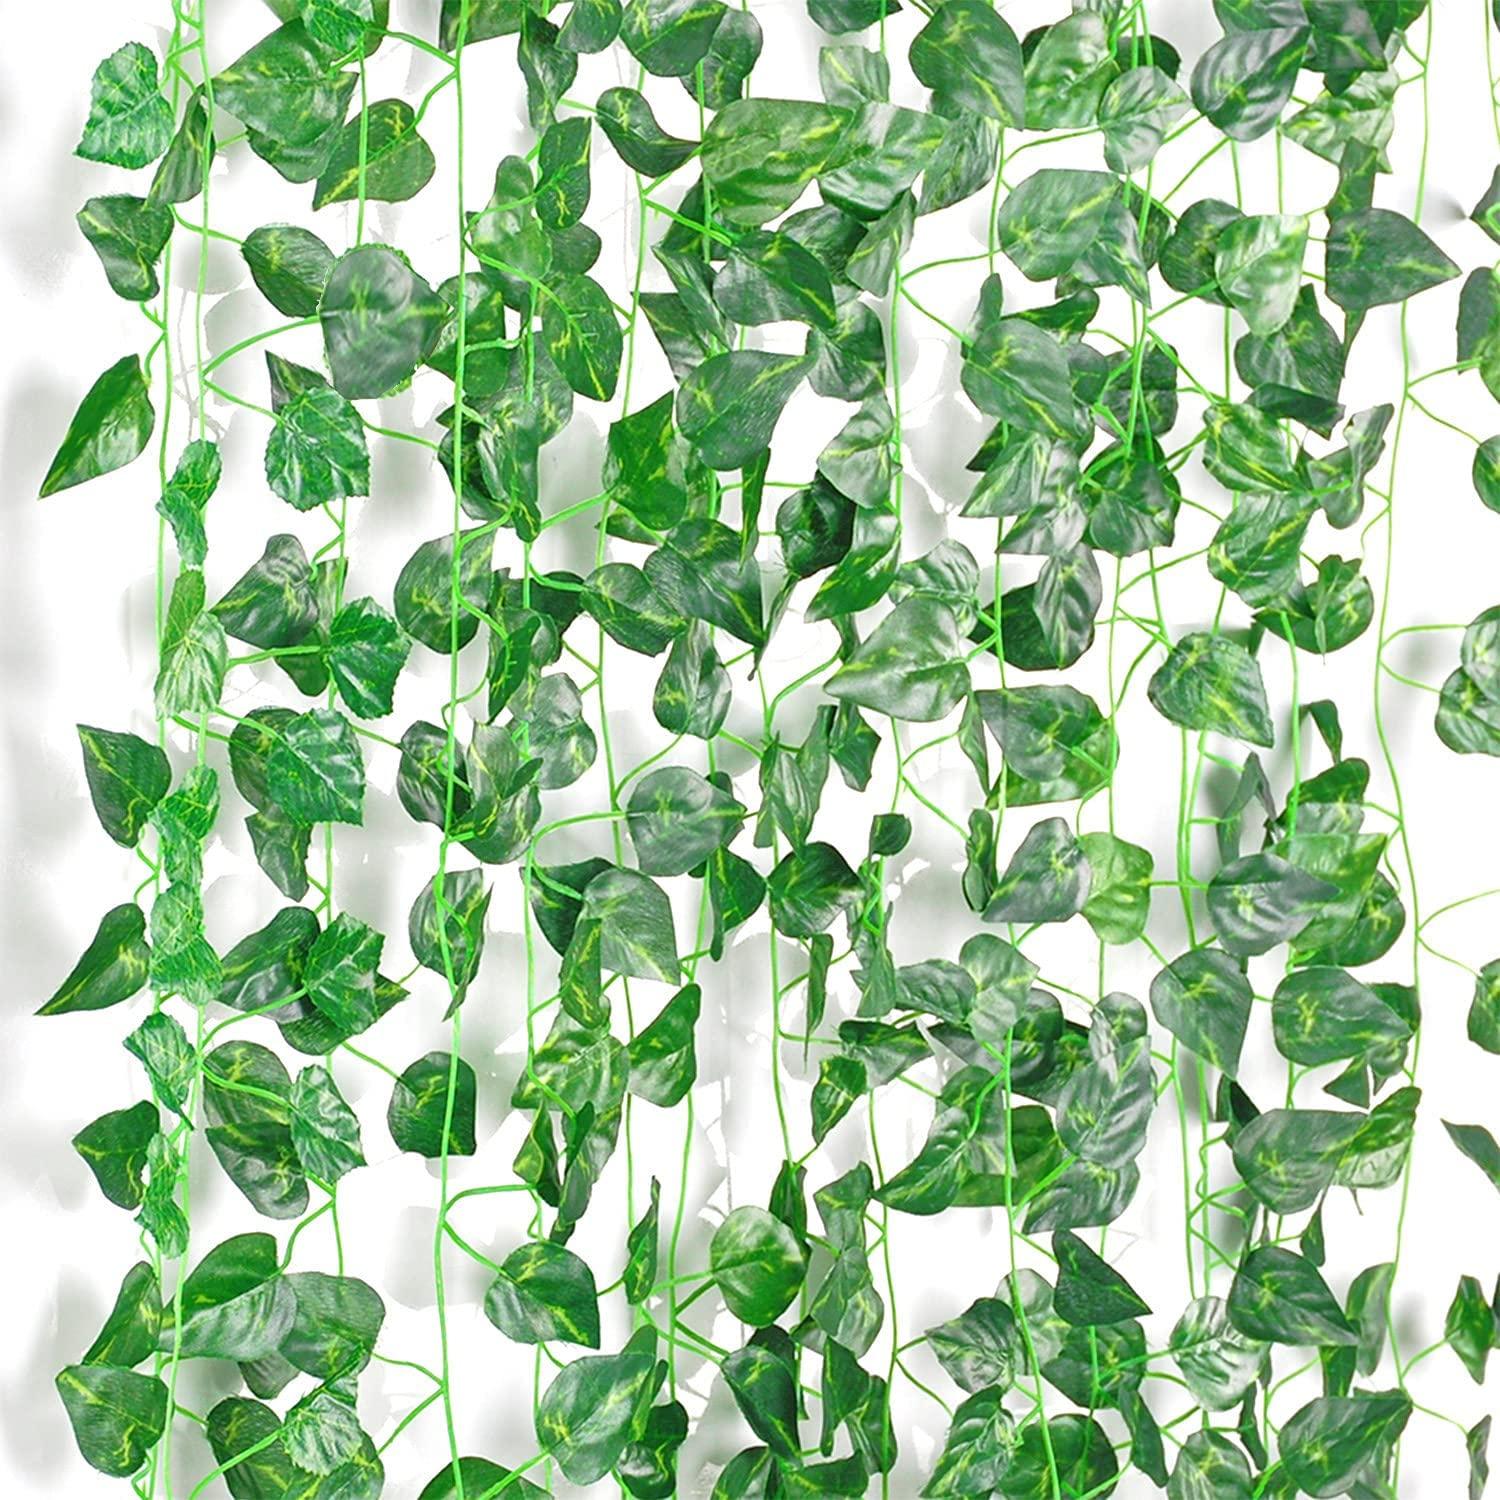 84 Ft 12 Strands Fake Ivy Leaves Artificial Ivy Garland Greenery Decor Faux Green Hanging Plant Vine for Wall Party Wedding Decoration - Lasercutwraps Shop